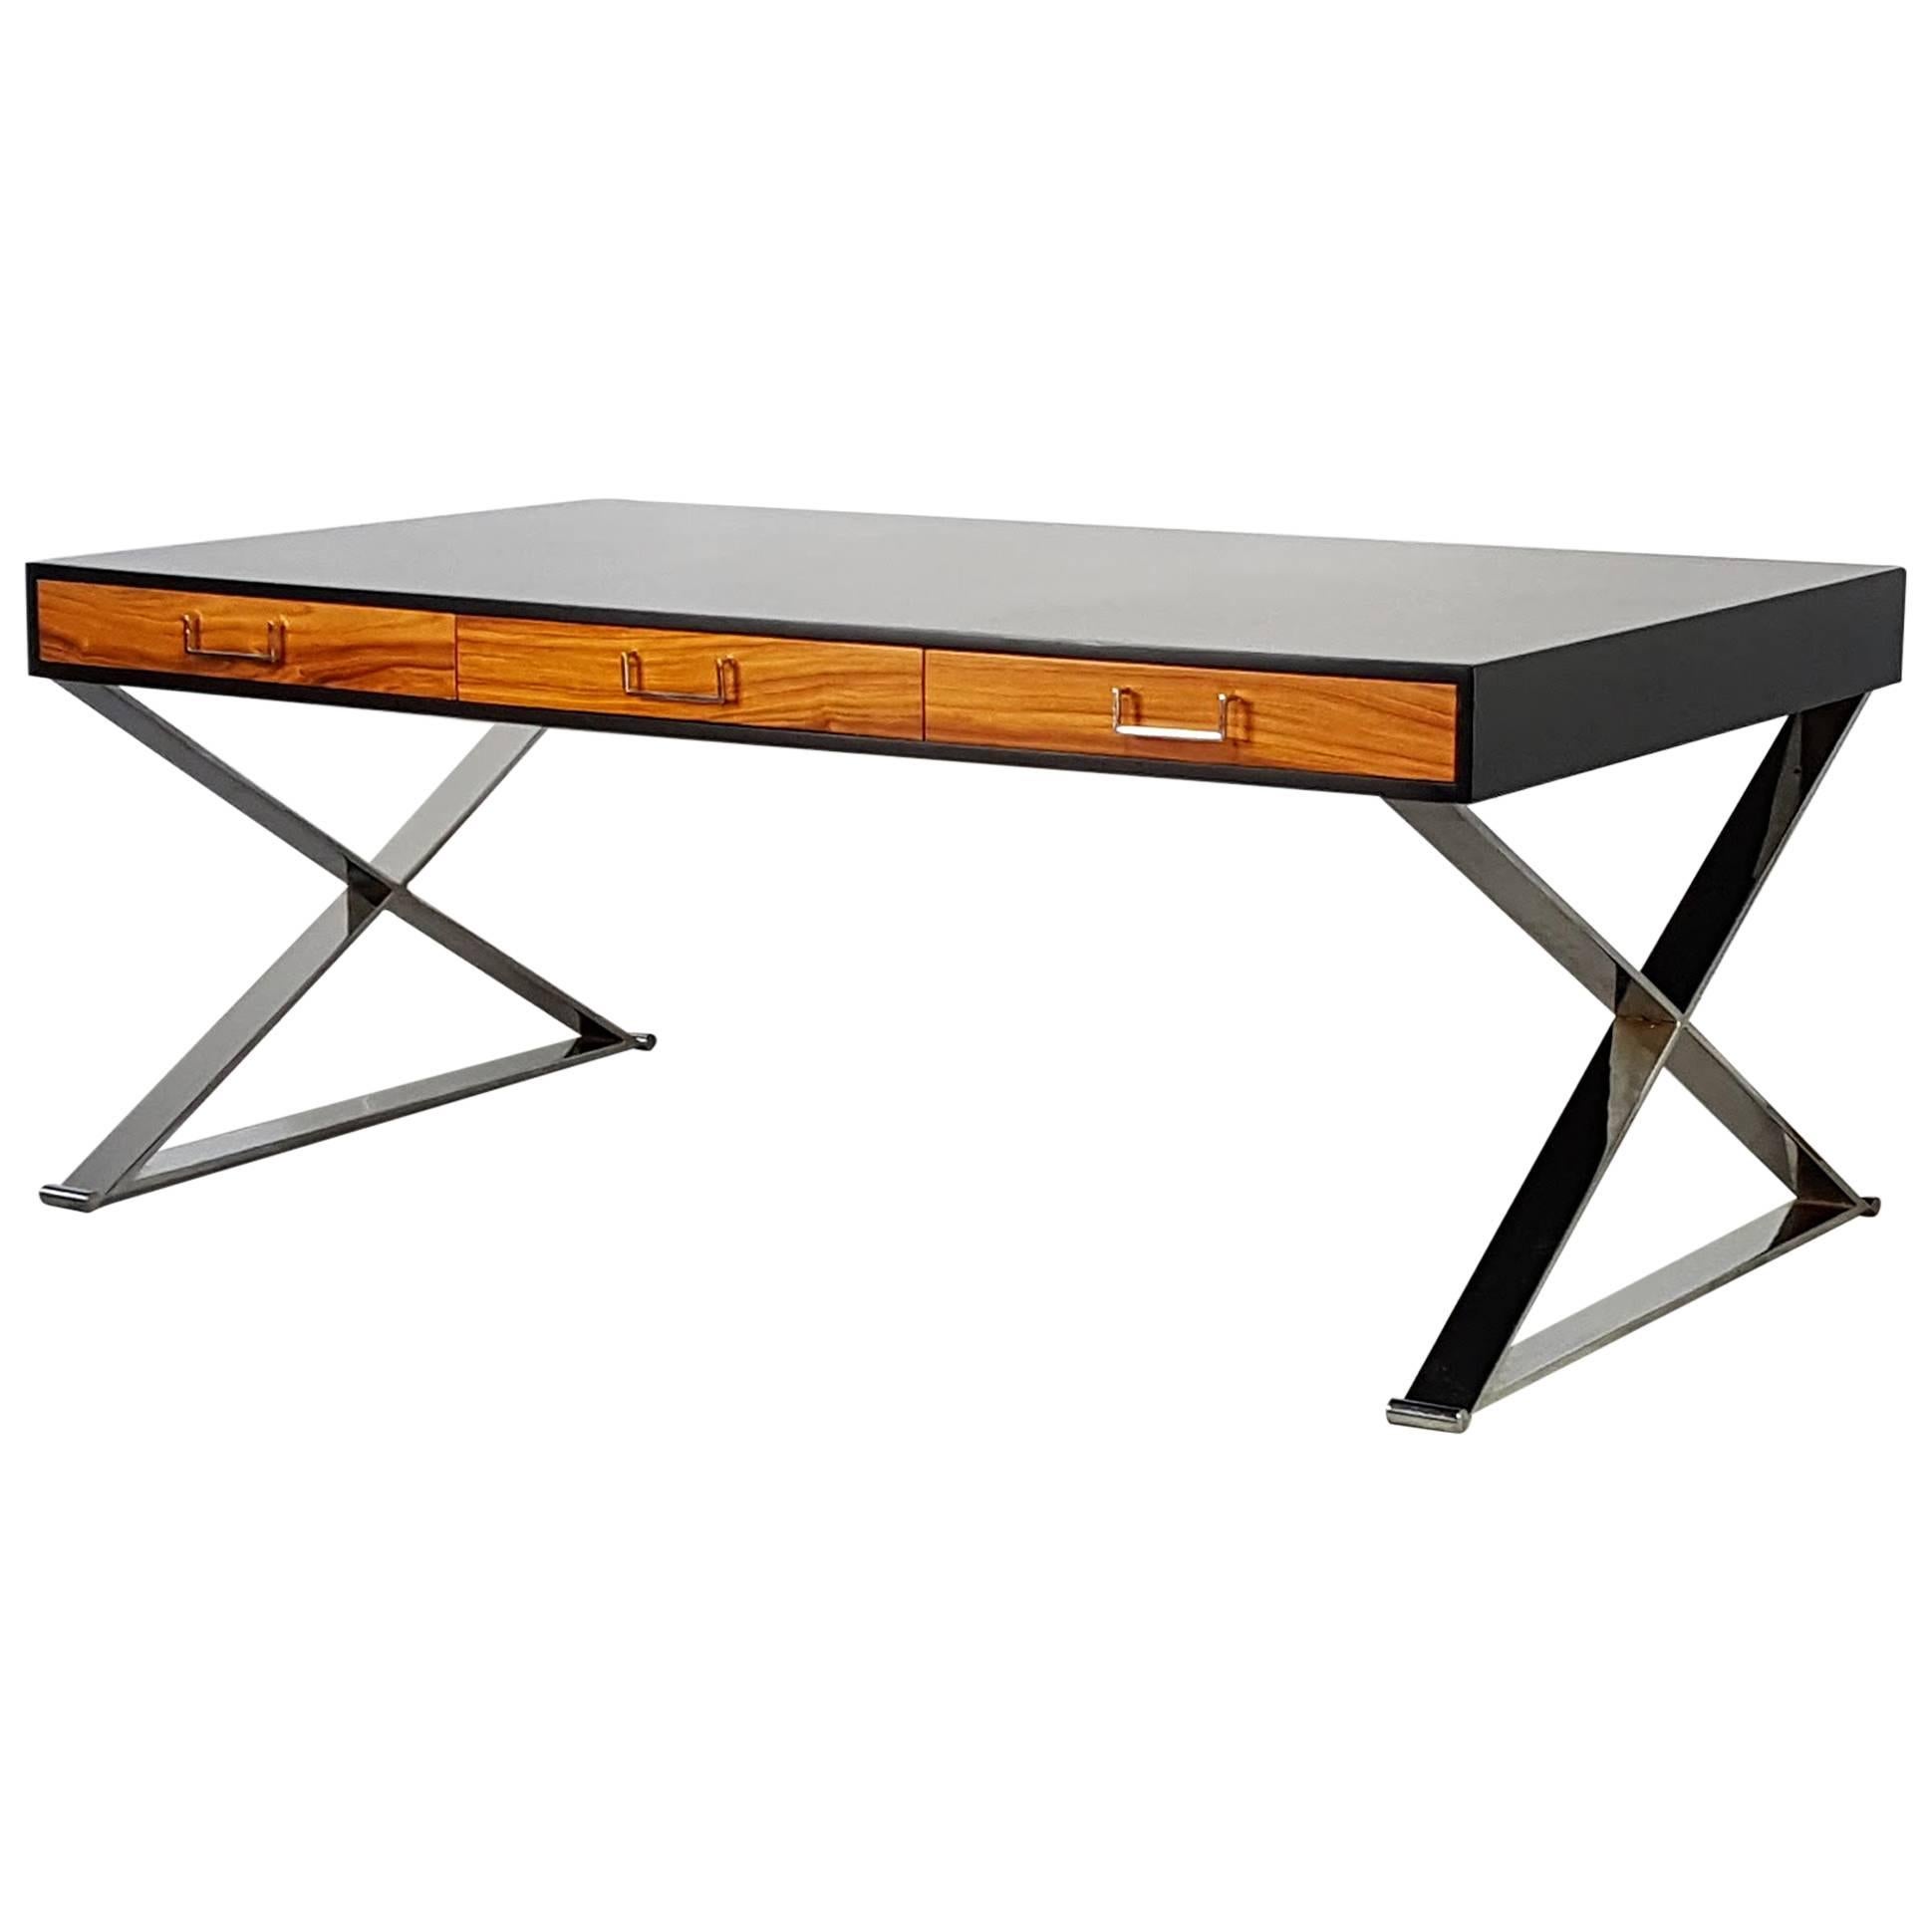 Massive Milo Baughman Executive Desk with Rosewood and Chrome Detail, 1970s